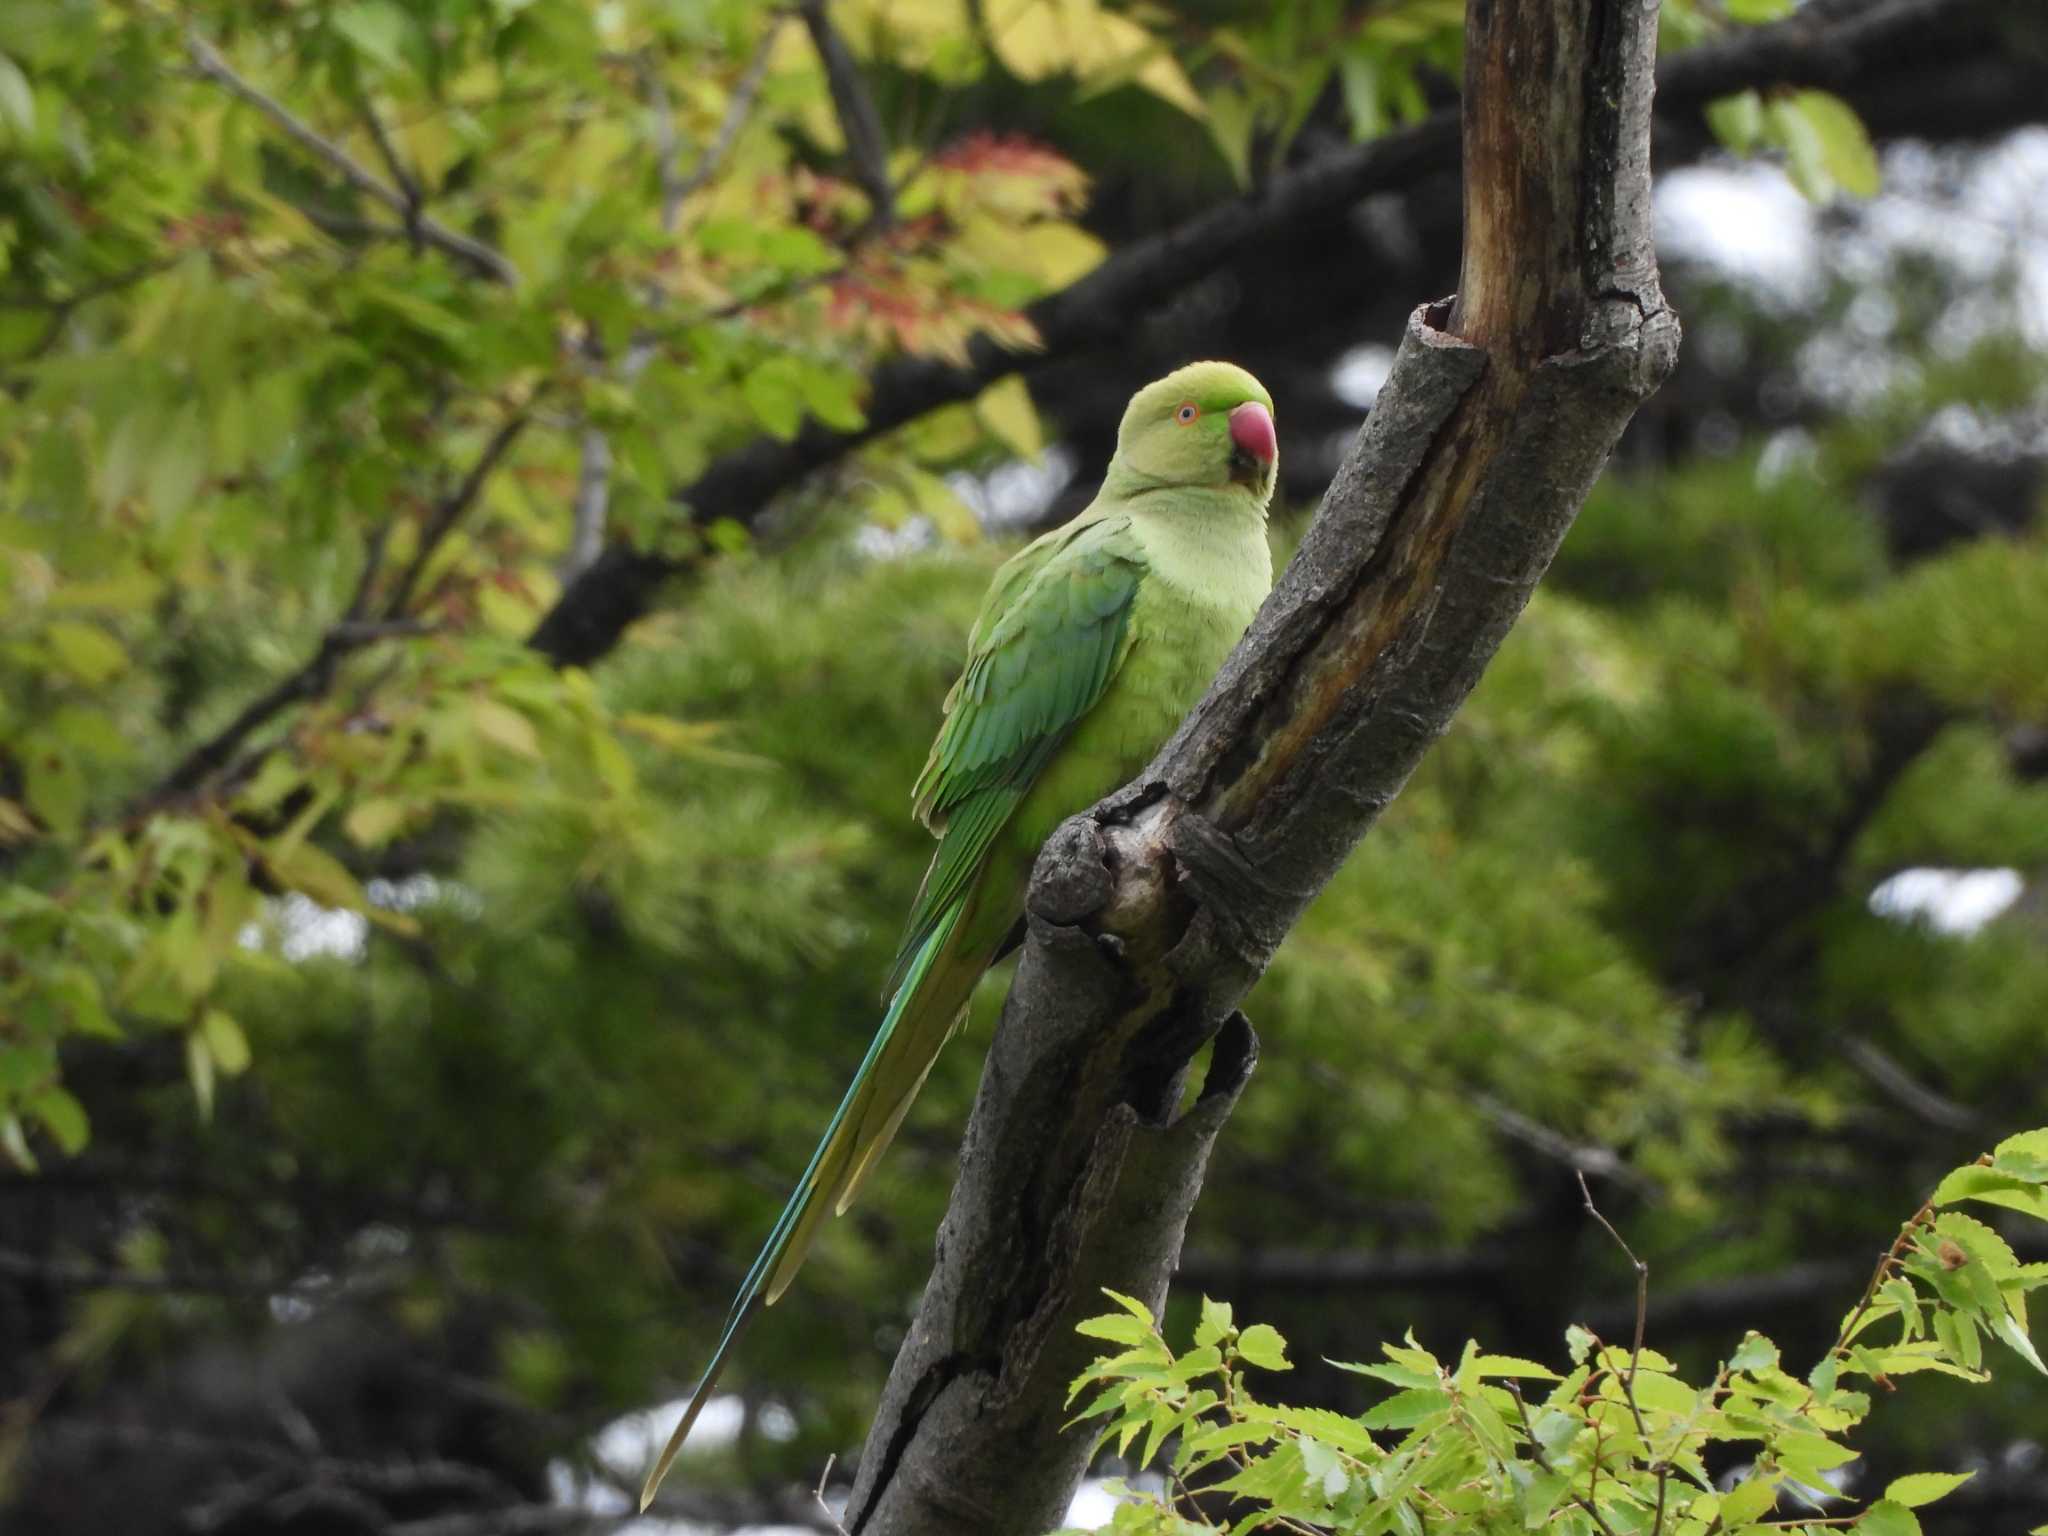 Photo of Indian Rose-necked Parakeet at 洗足池公園 by エヌ